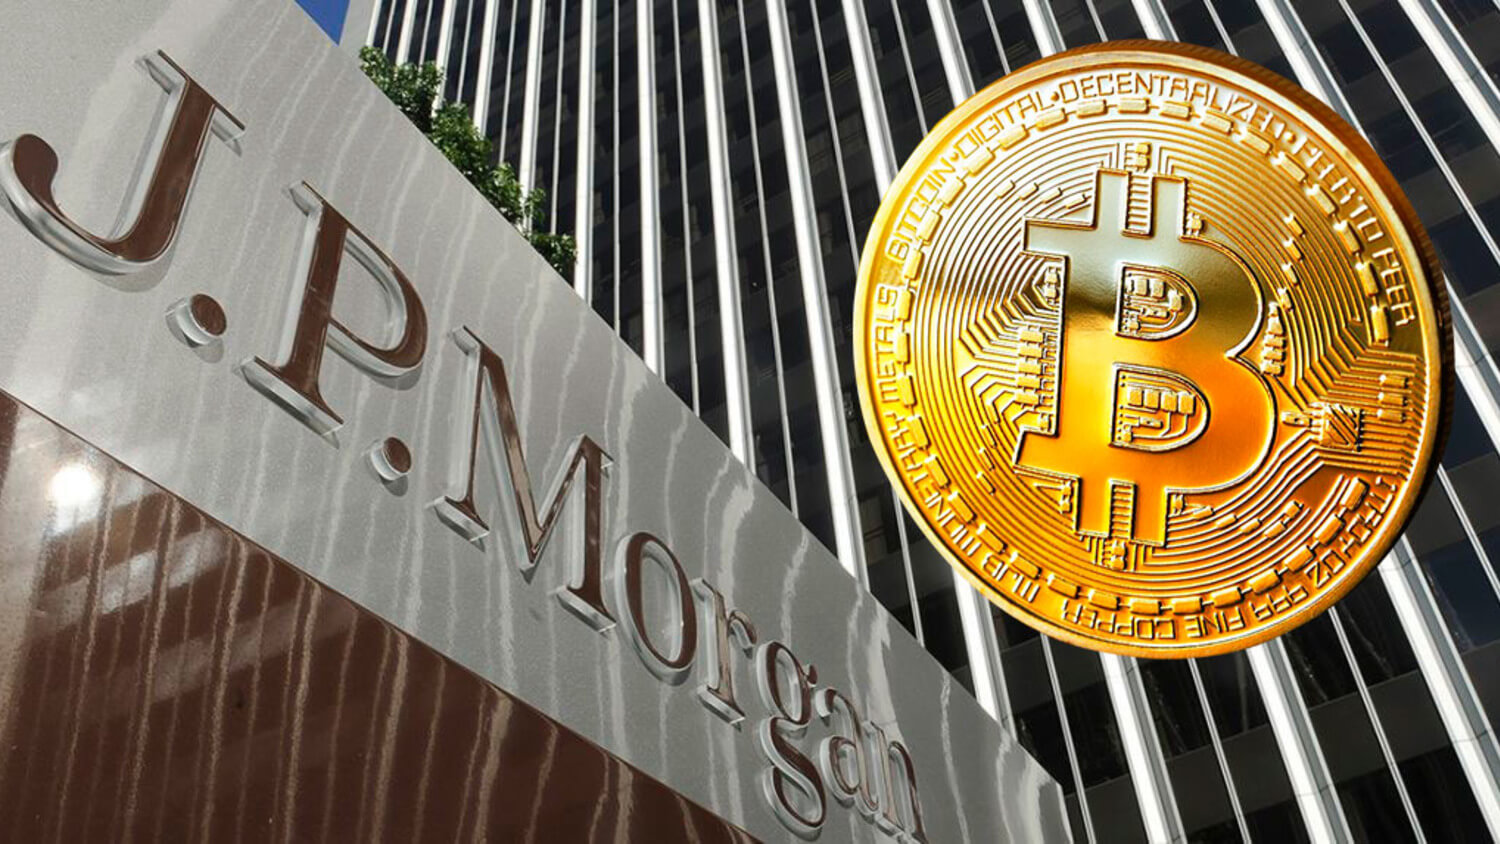 Find jp morgan crypto report cryptocurrency mining theory